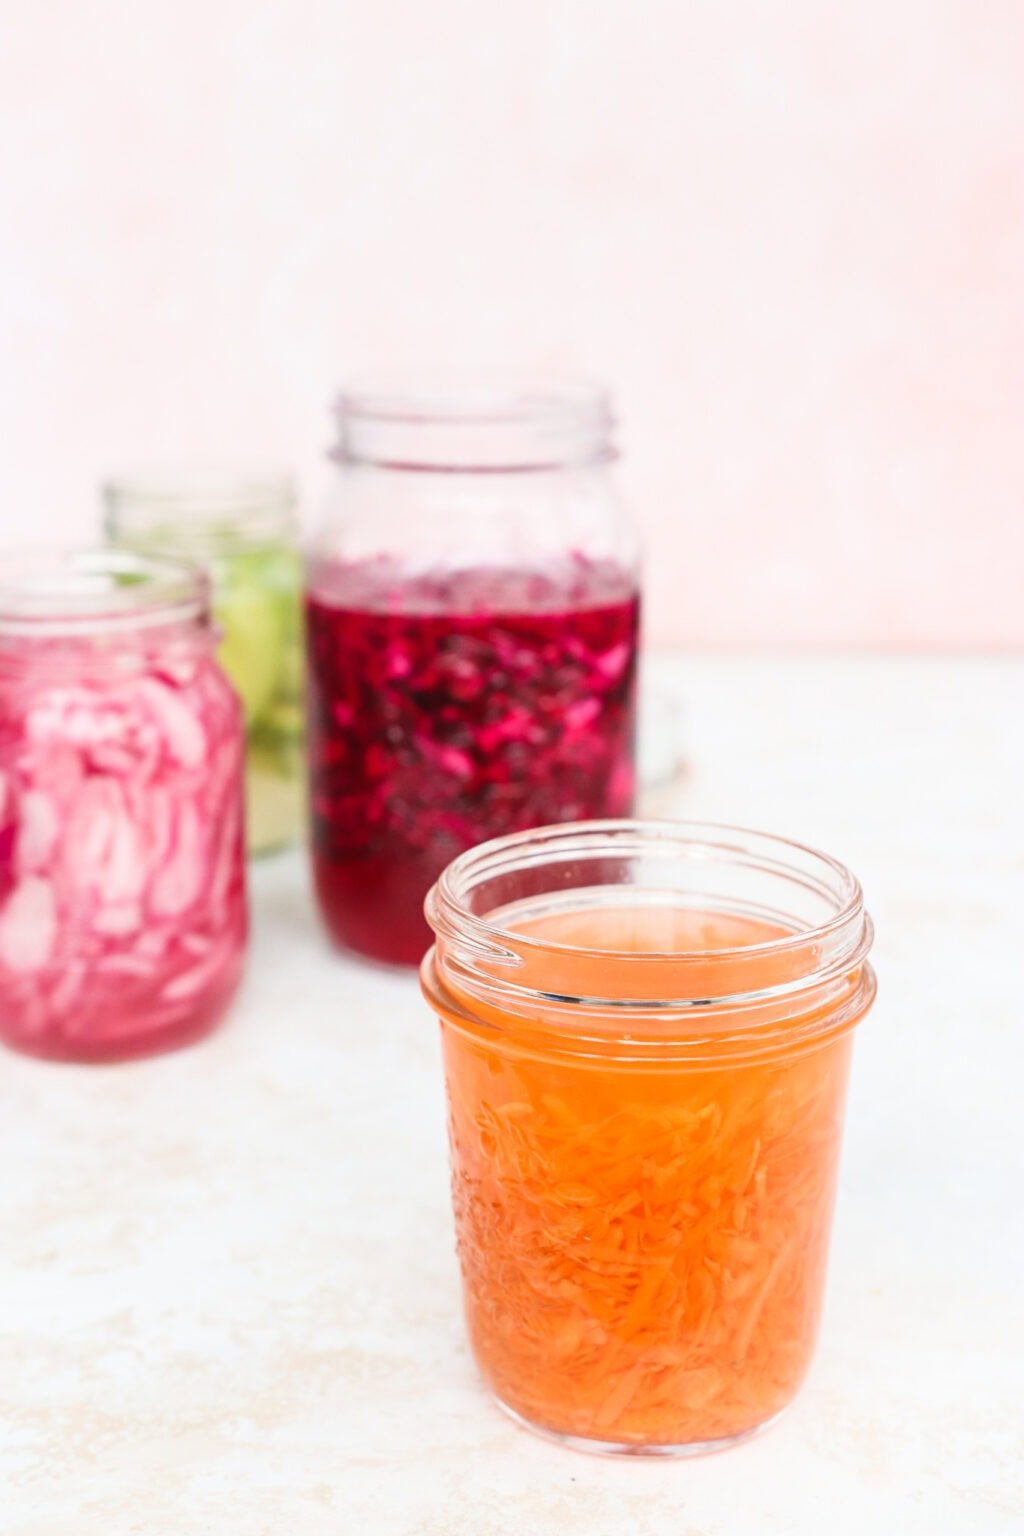 Quick pickled shredded carrots, red cabbage, avocados, and red onions in four glass jars